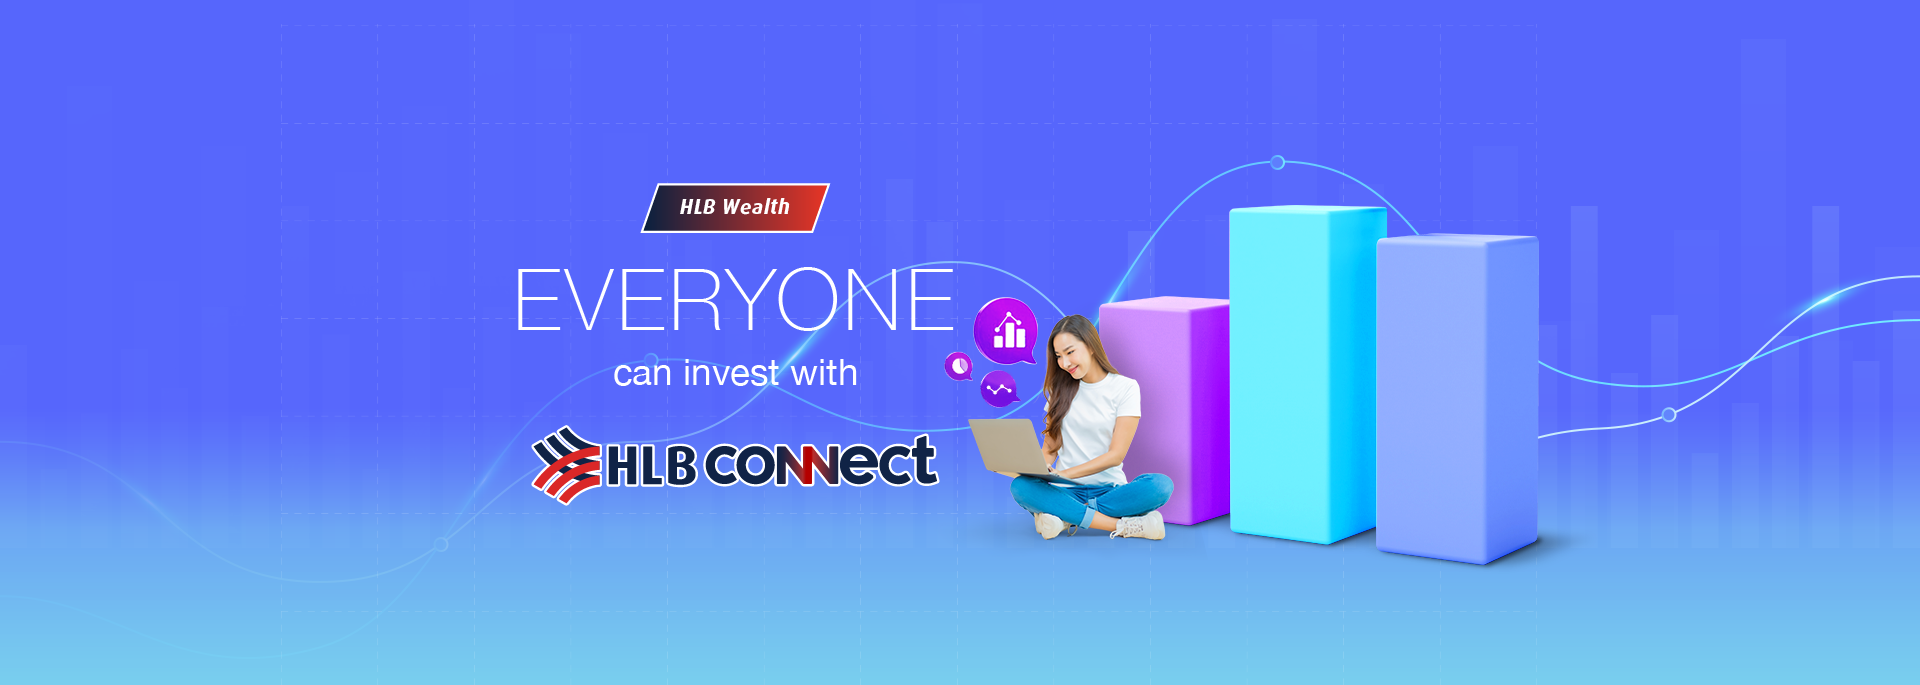 Everyone can invest with HLB Connect